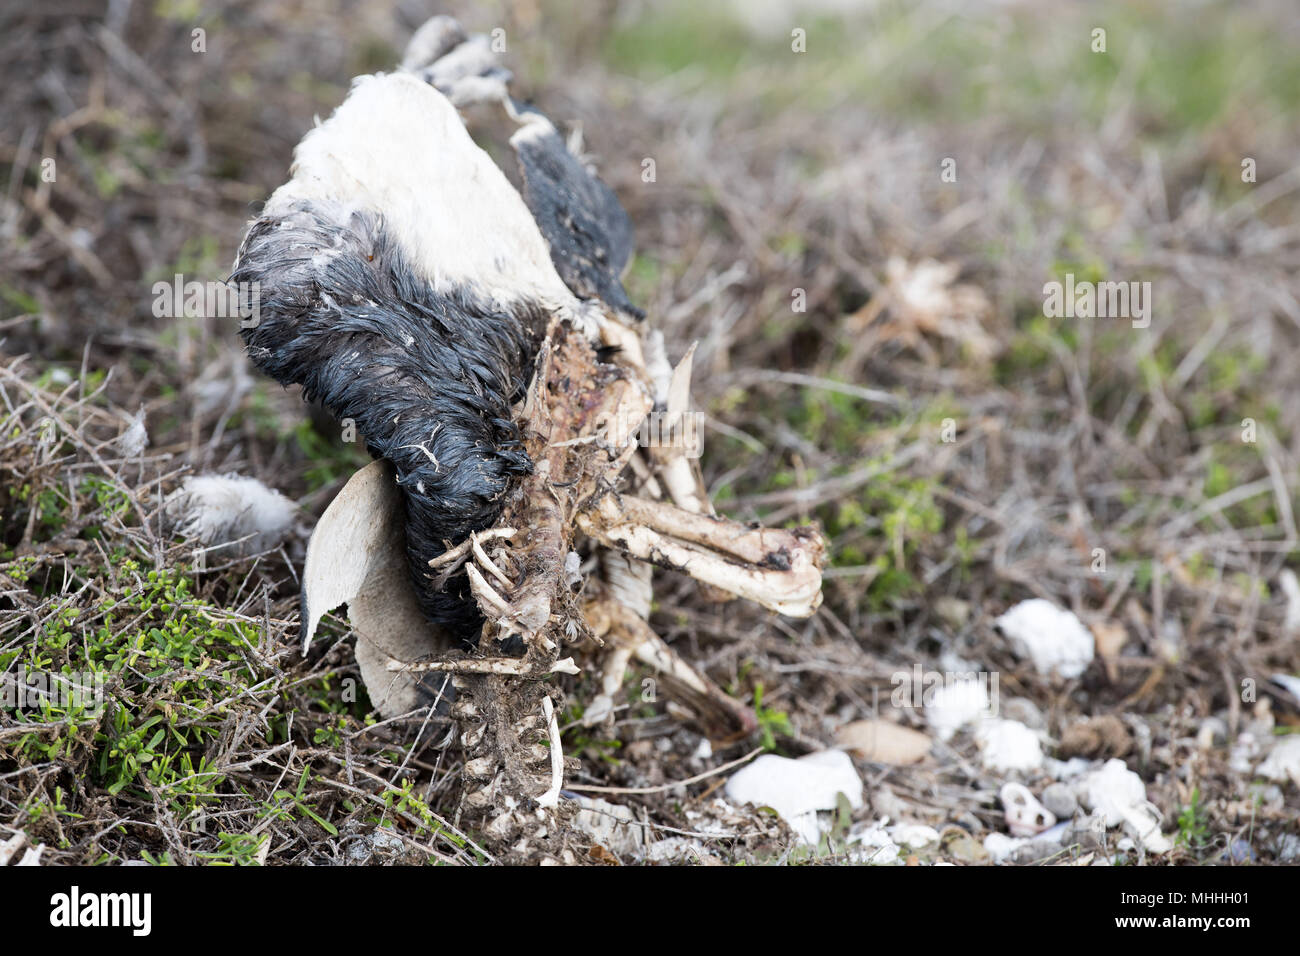 died penguin skeleton on the ground in Argentina Stock Photo